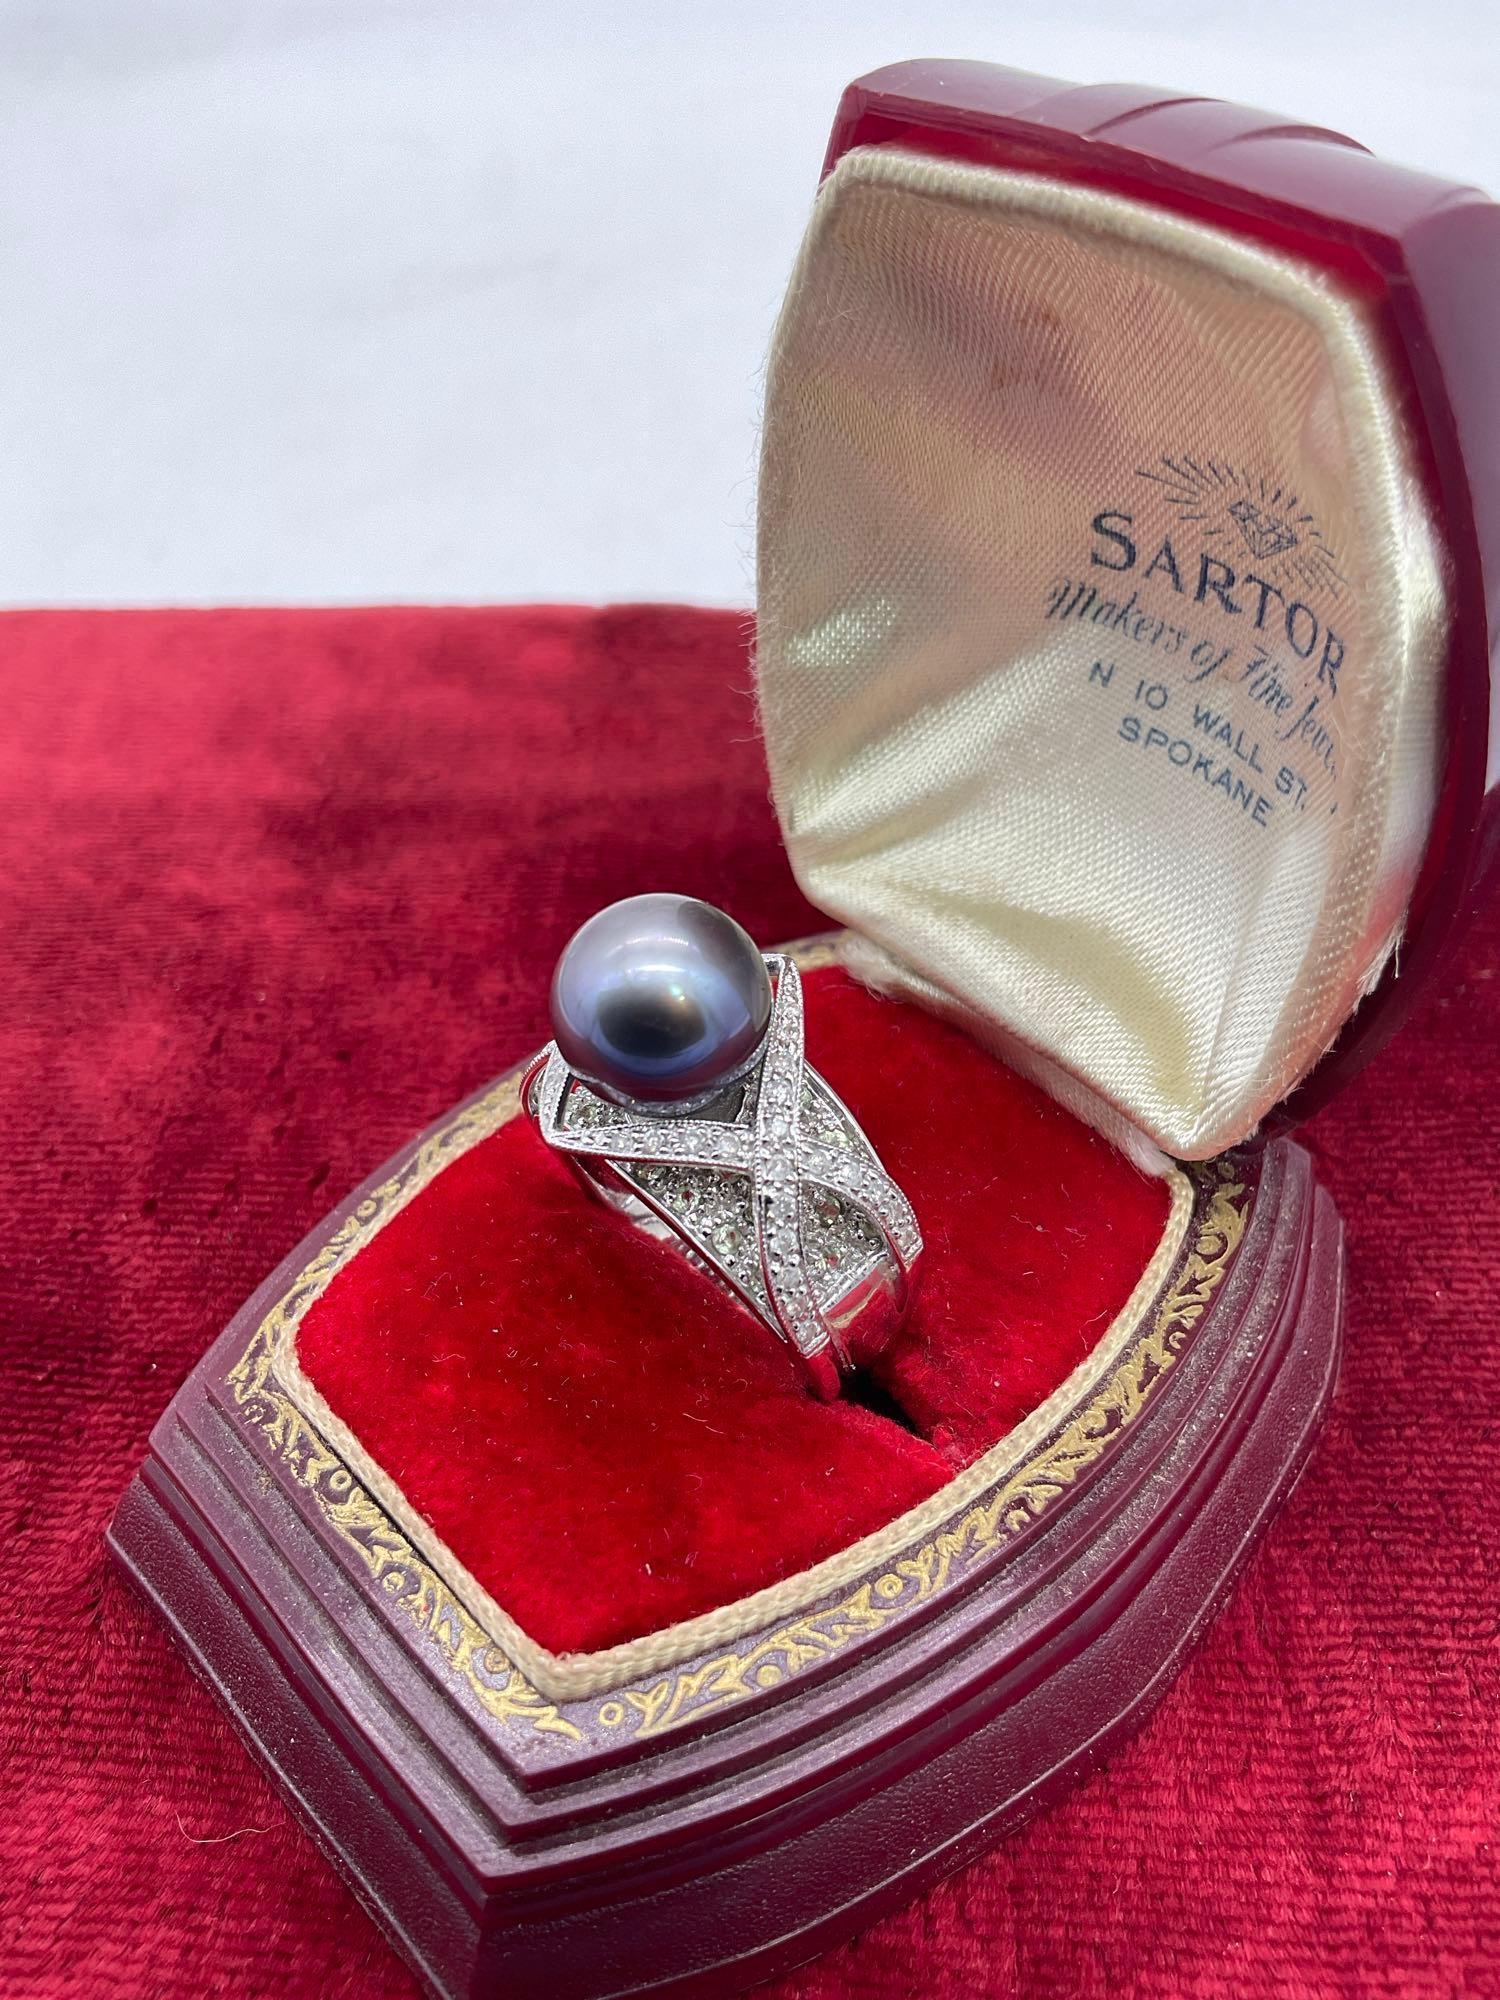 Fabulous 13.23g 14k white gold ring with large black pearl and diamond setting - approx 50+ diamo...